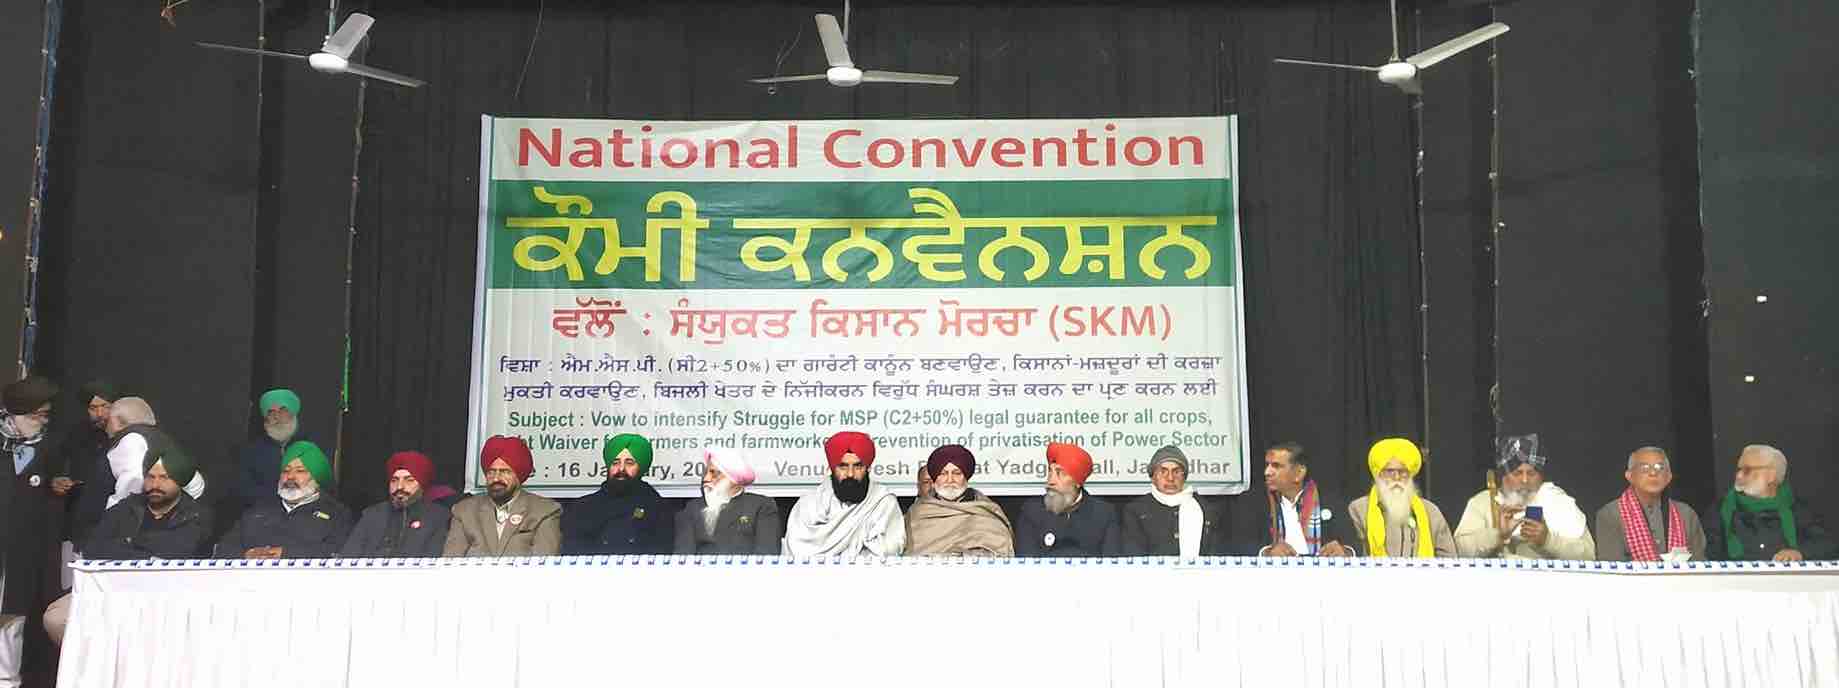 SKM Convention Calls for Rural Strike on Feb 16, Trade Unions to also Embark on Strike